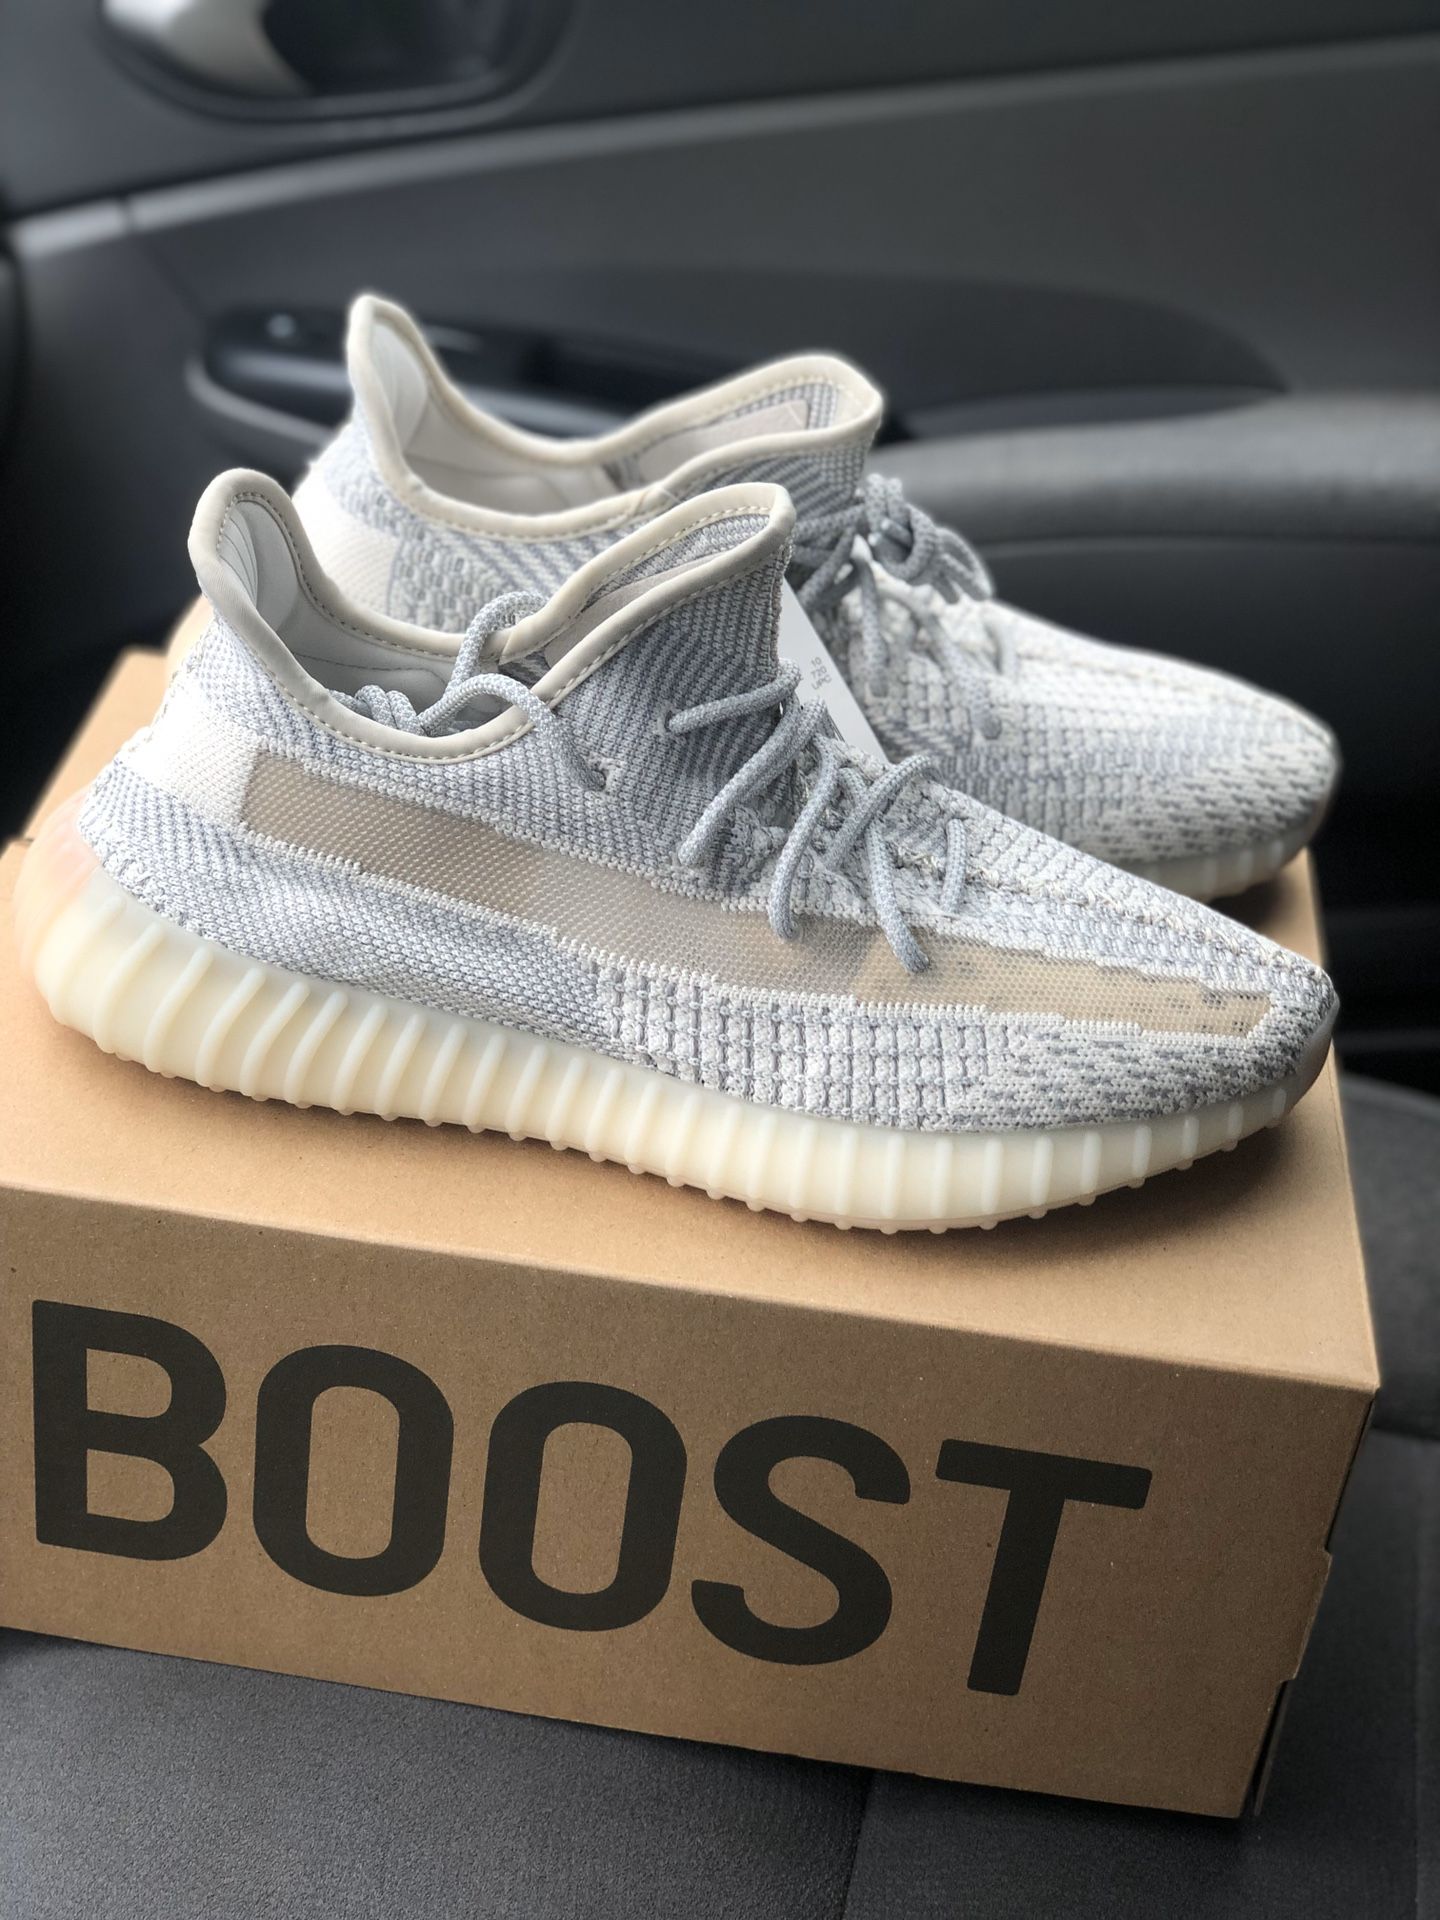 Adidas Yeezy 350 Boost v2 Cloud White Size 10.5